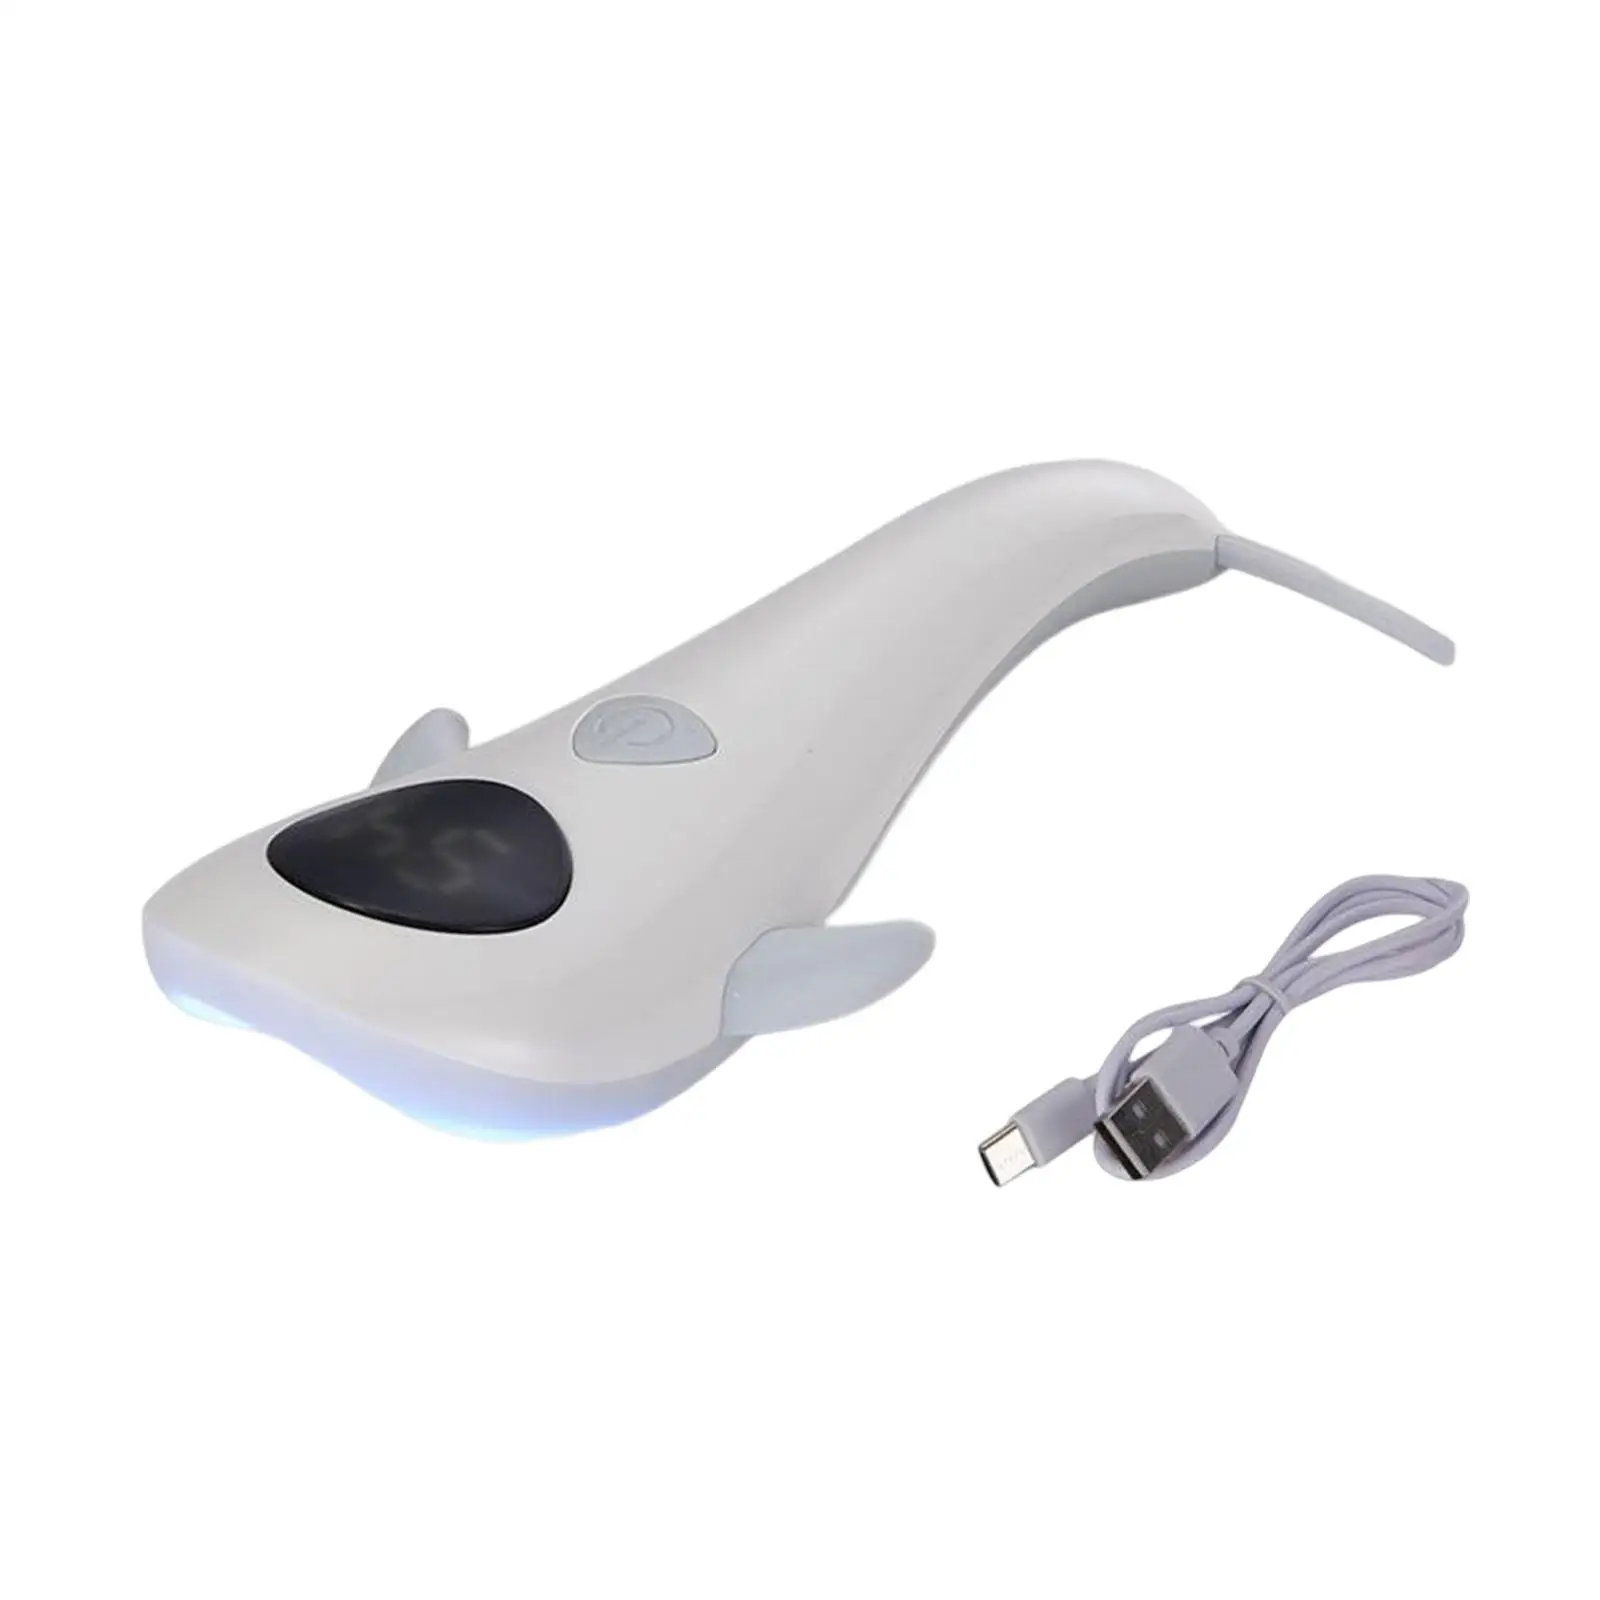 Handheld Nail Lamp Use C Manicure with 60S 90S 2 timers 5W Nail Dryer